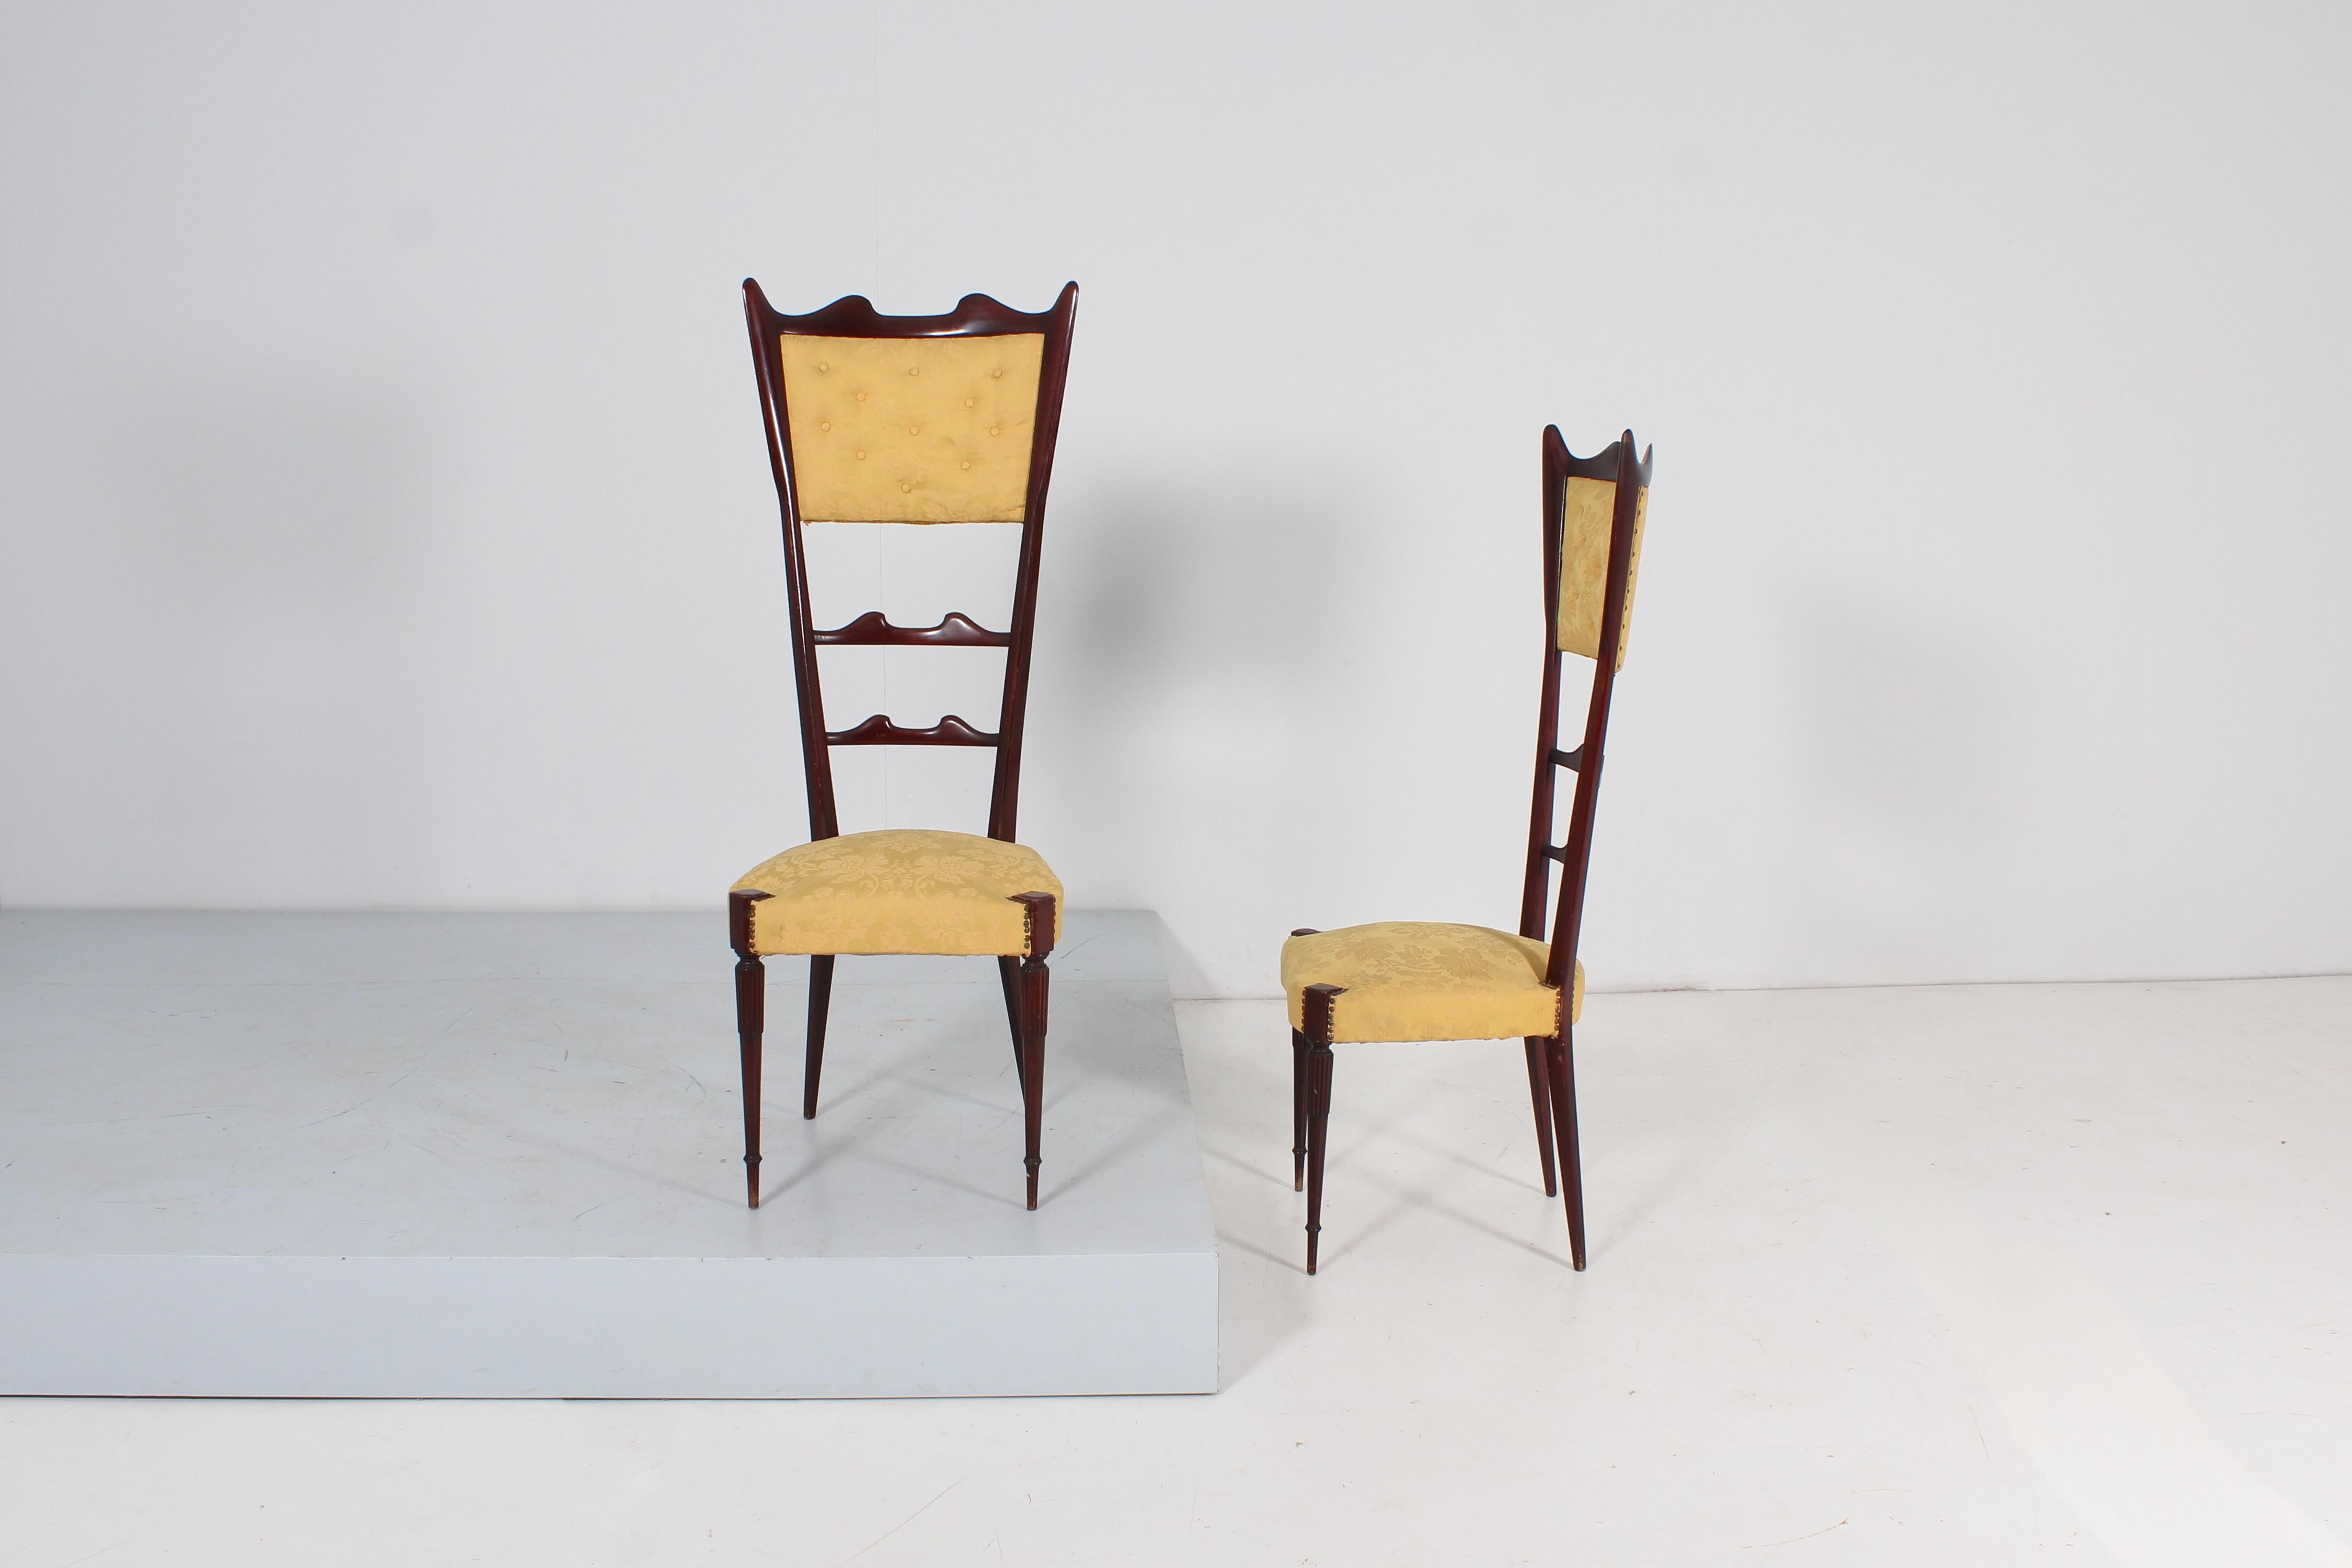 Set of two dining chairs with wooden structure, golden fabric covering with relief floral motifs, and spiked legs. Gio Ponti style, Italian manufacture in 1950s
Wear consistent with age and use.